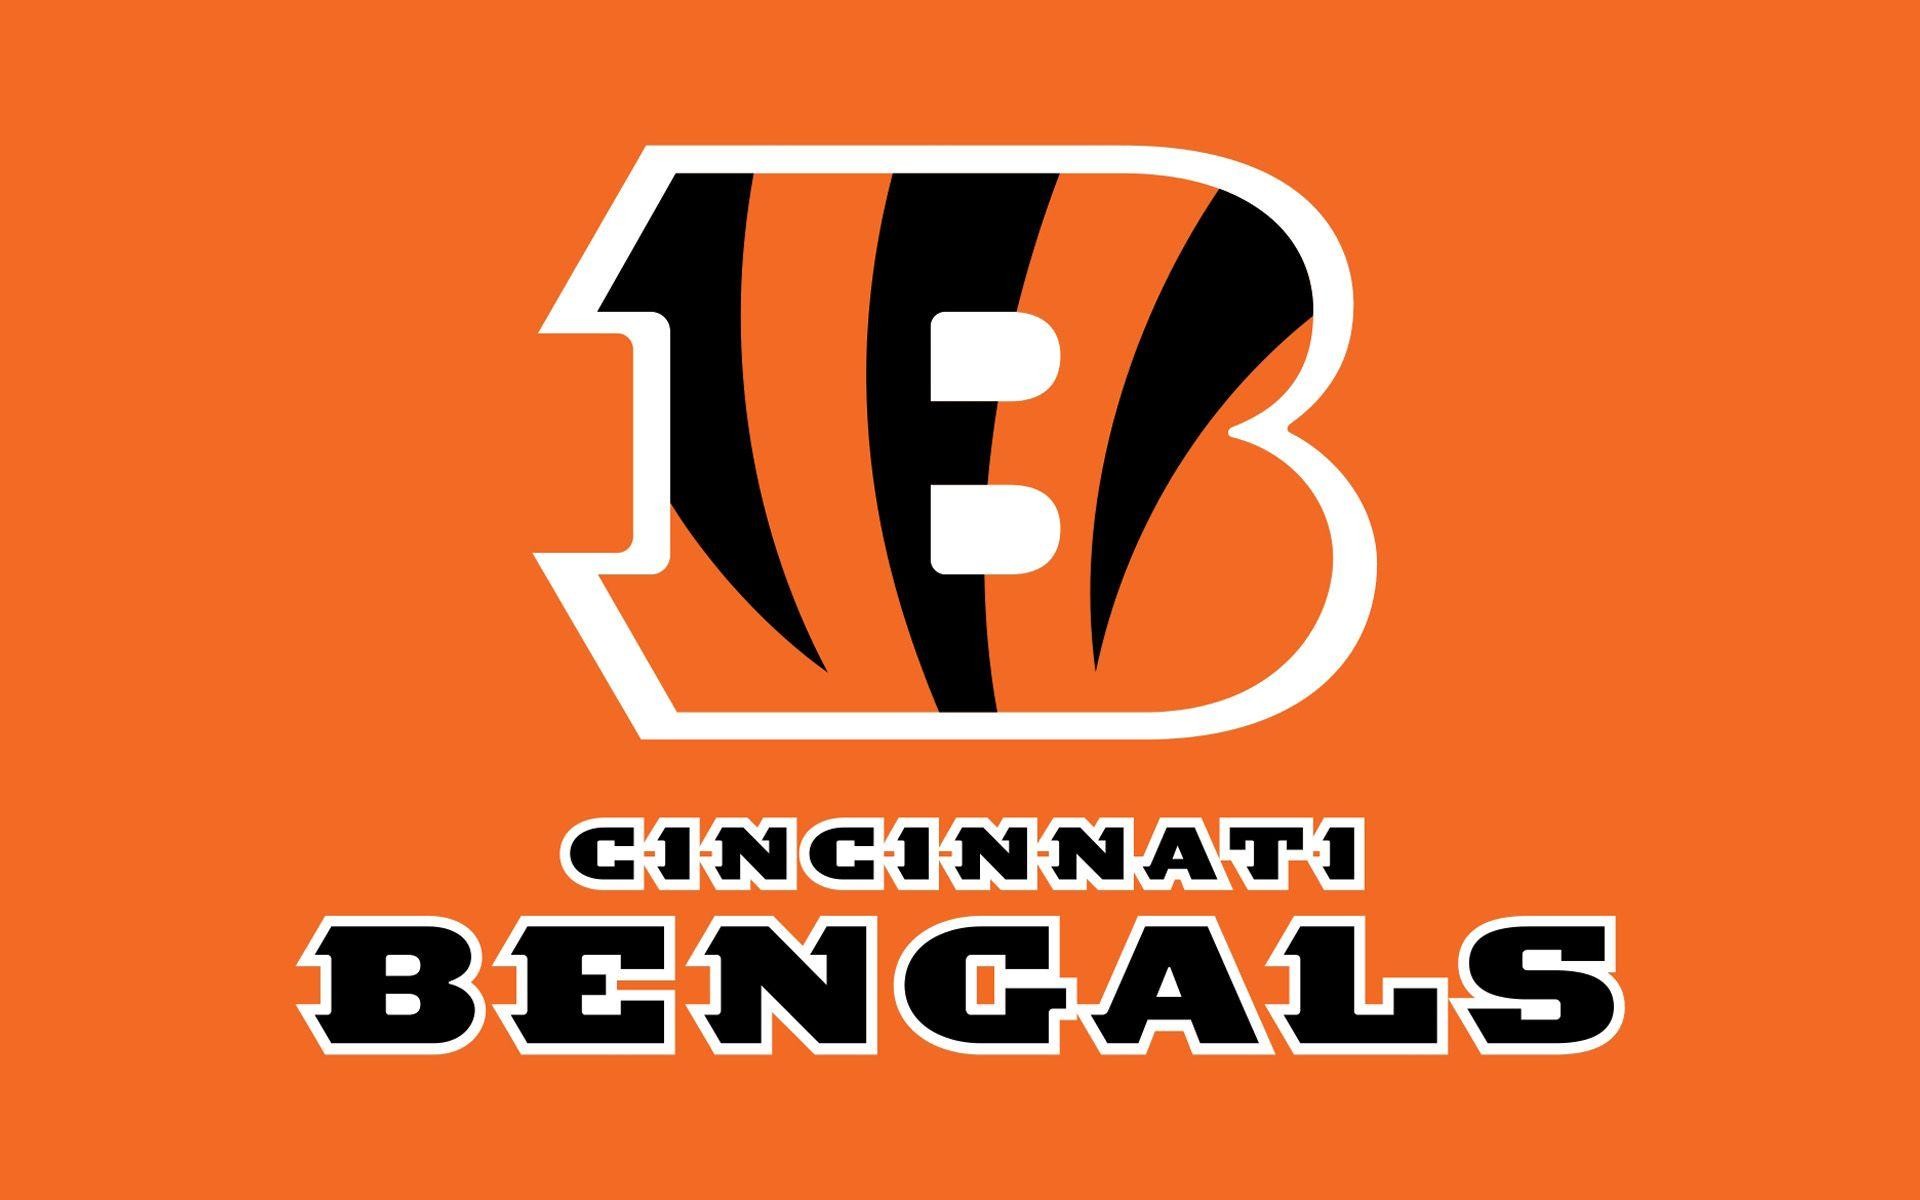 Bengals Wallpapers – Full HD wallpaper search